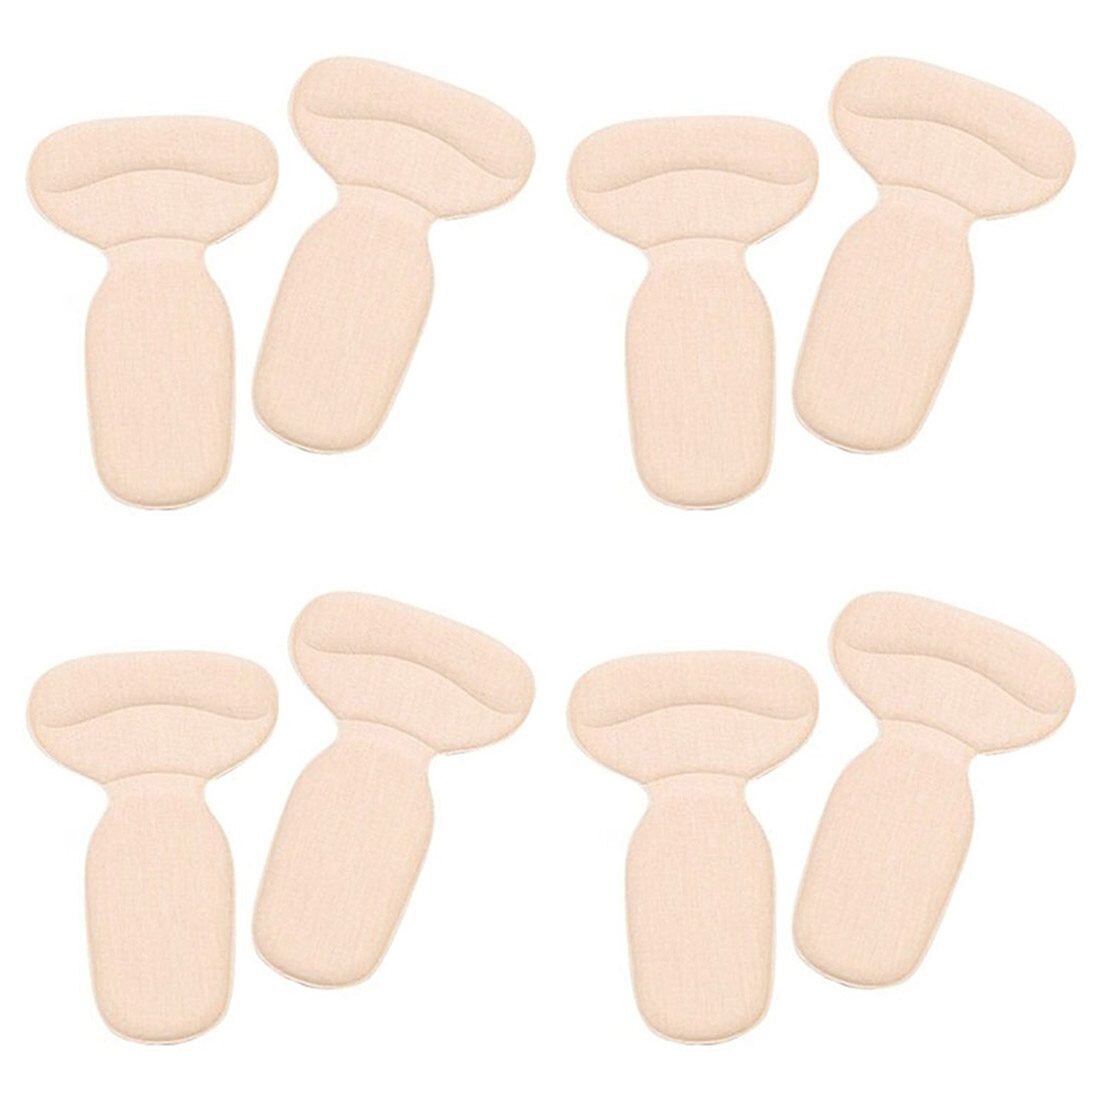 4 Pairs Heel Grips Extra Strong Heel Stickers Shoe Heel Snugs Inserts Insoles Pads Foot Care Protector Beige - ebowsos